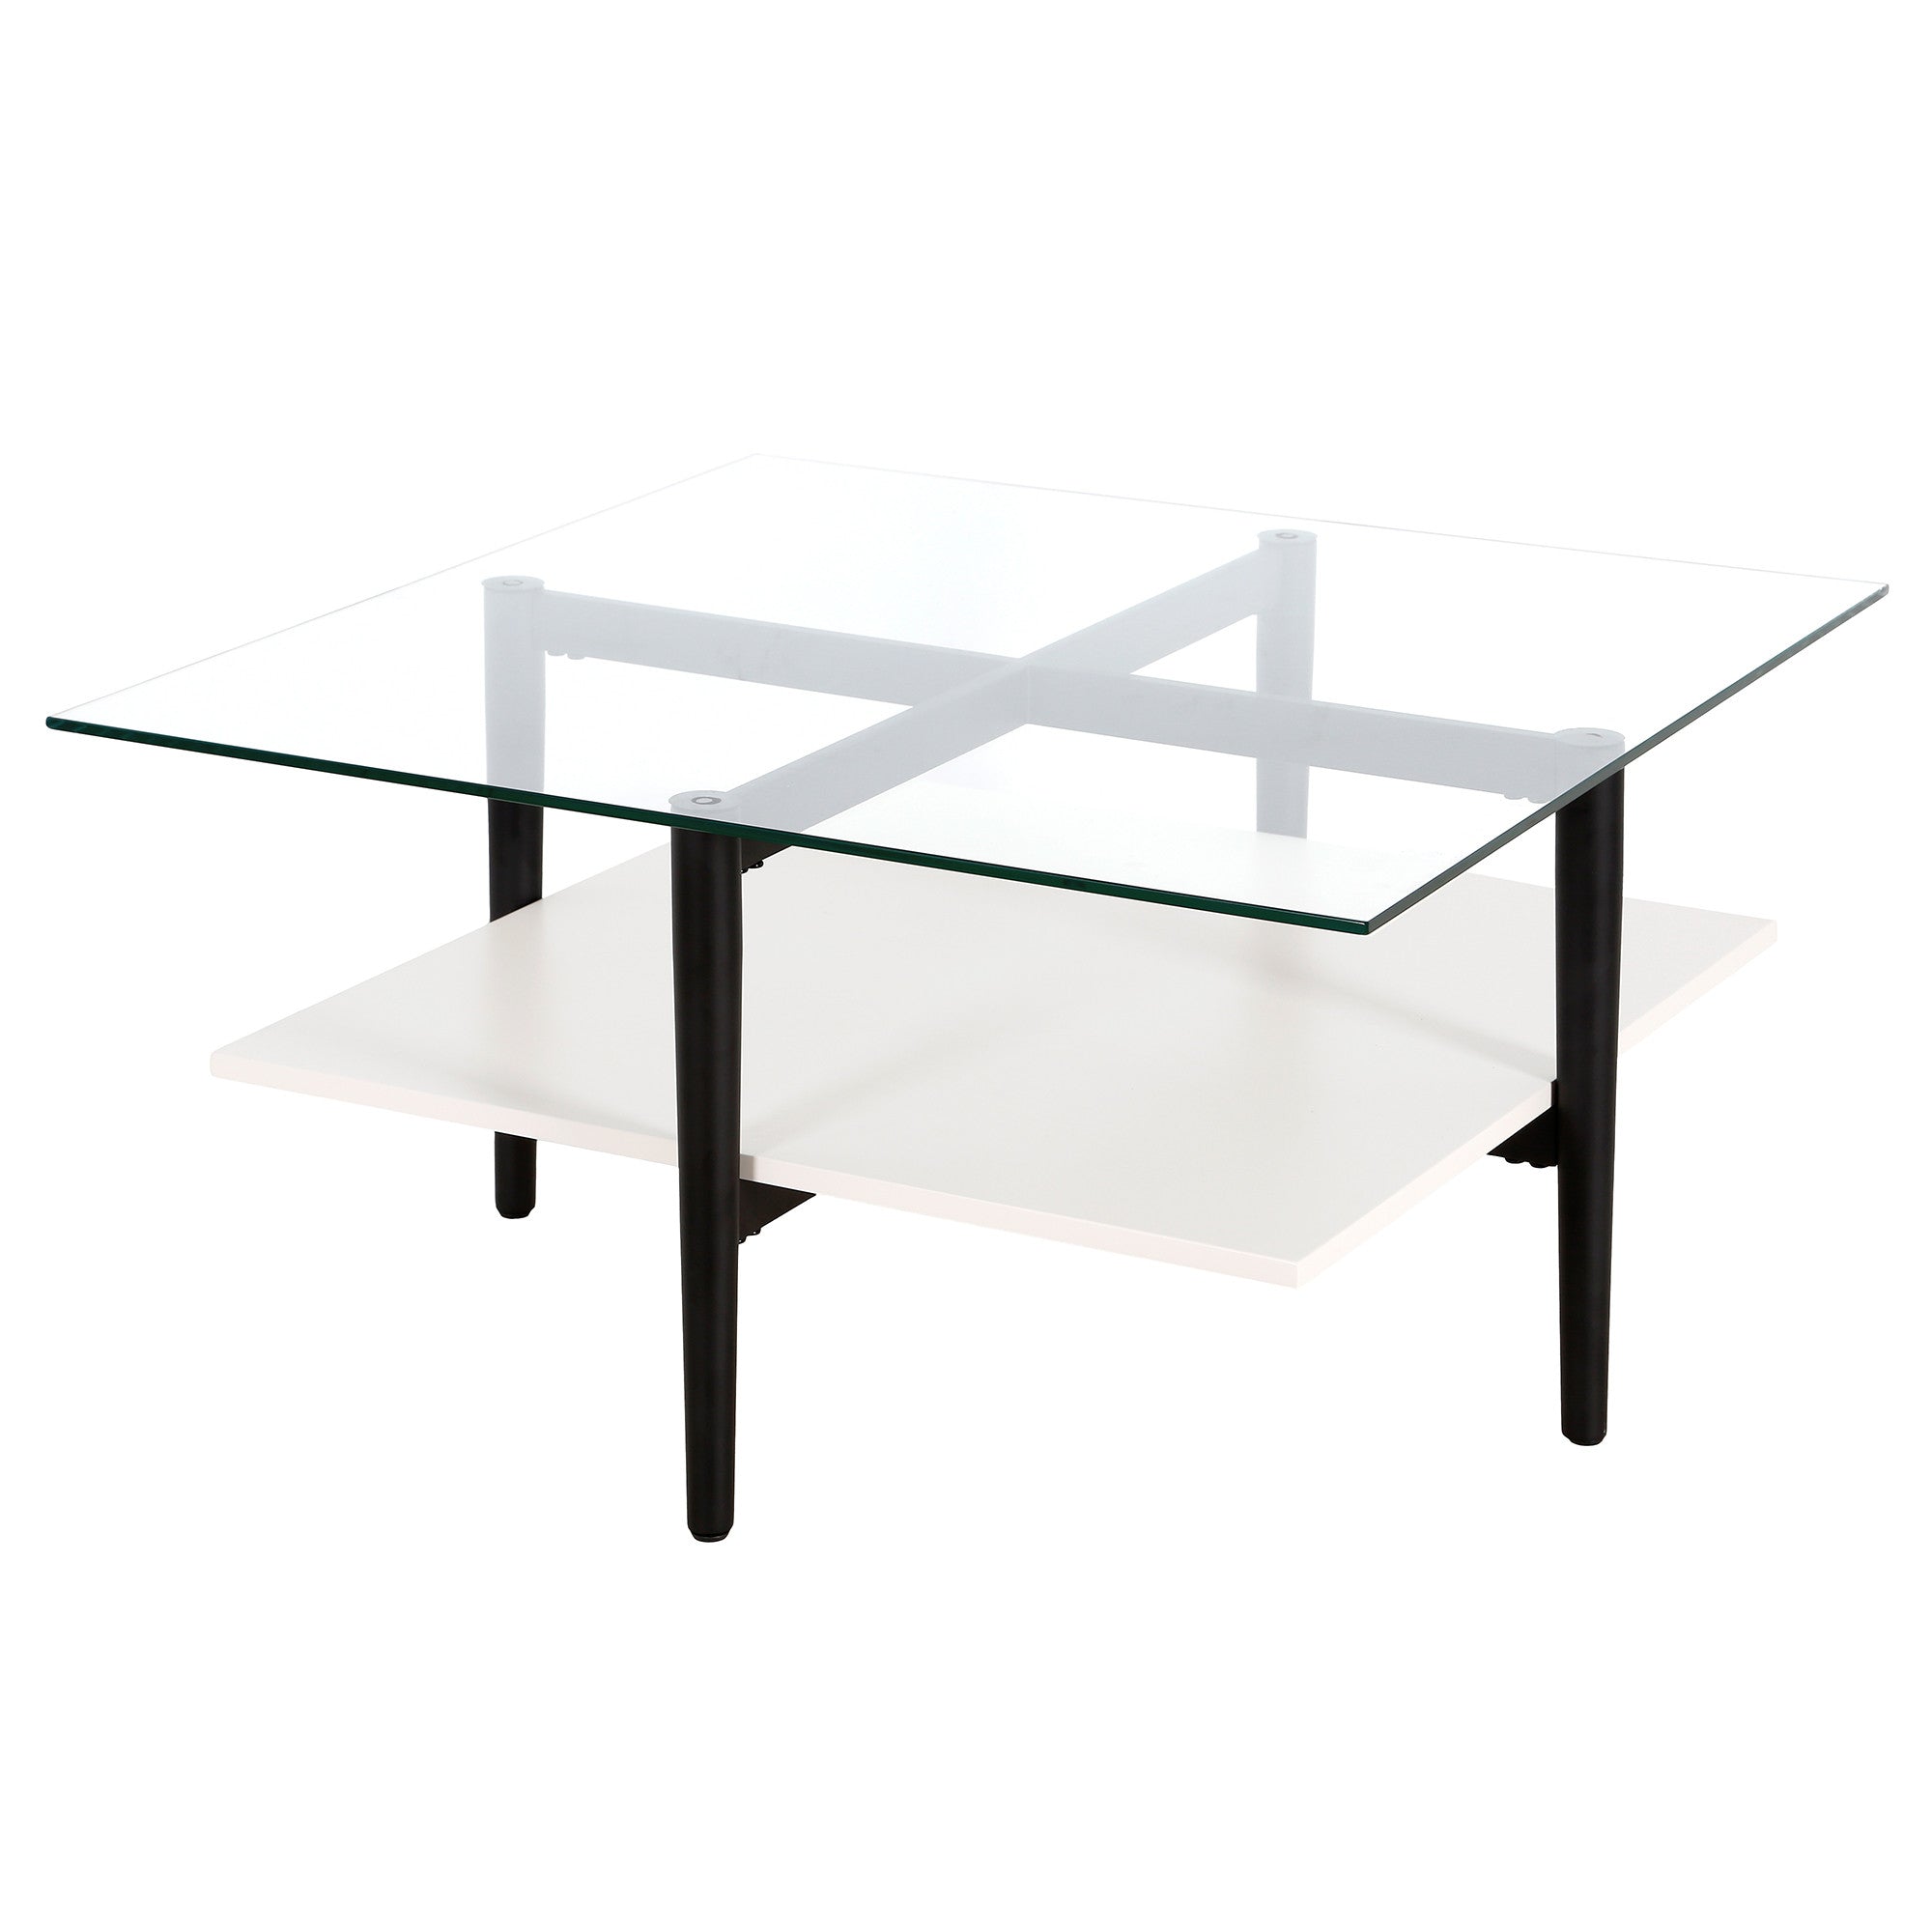 32" White And Black Glass And Steel Square Coffee Table With Shelf